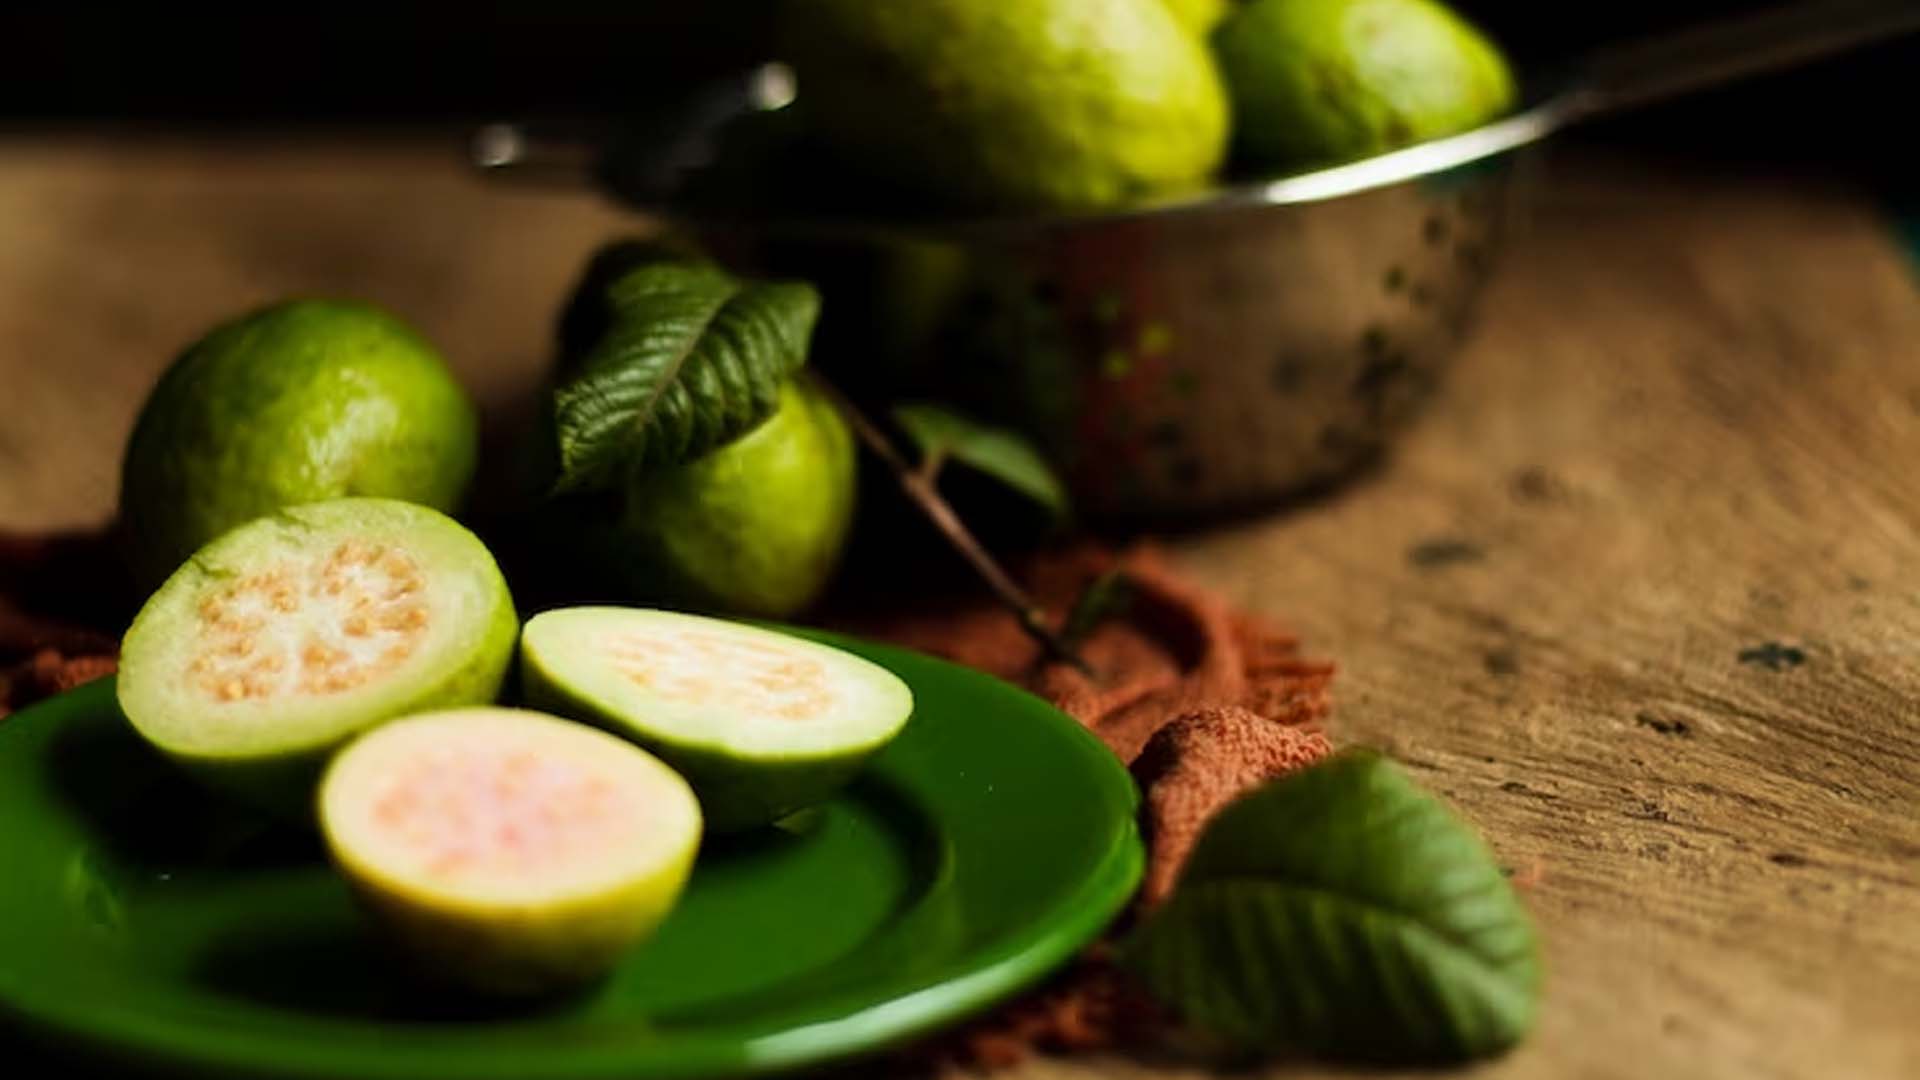 Guava Nutritional Value